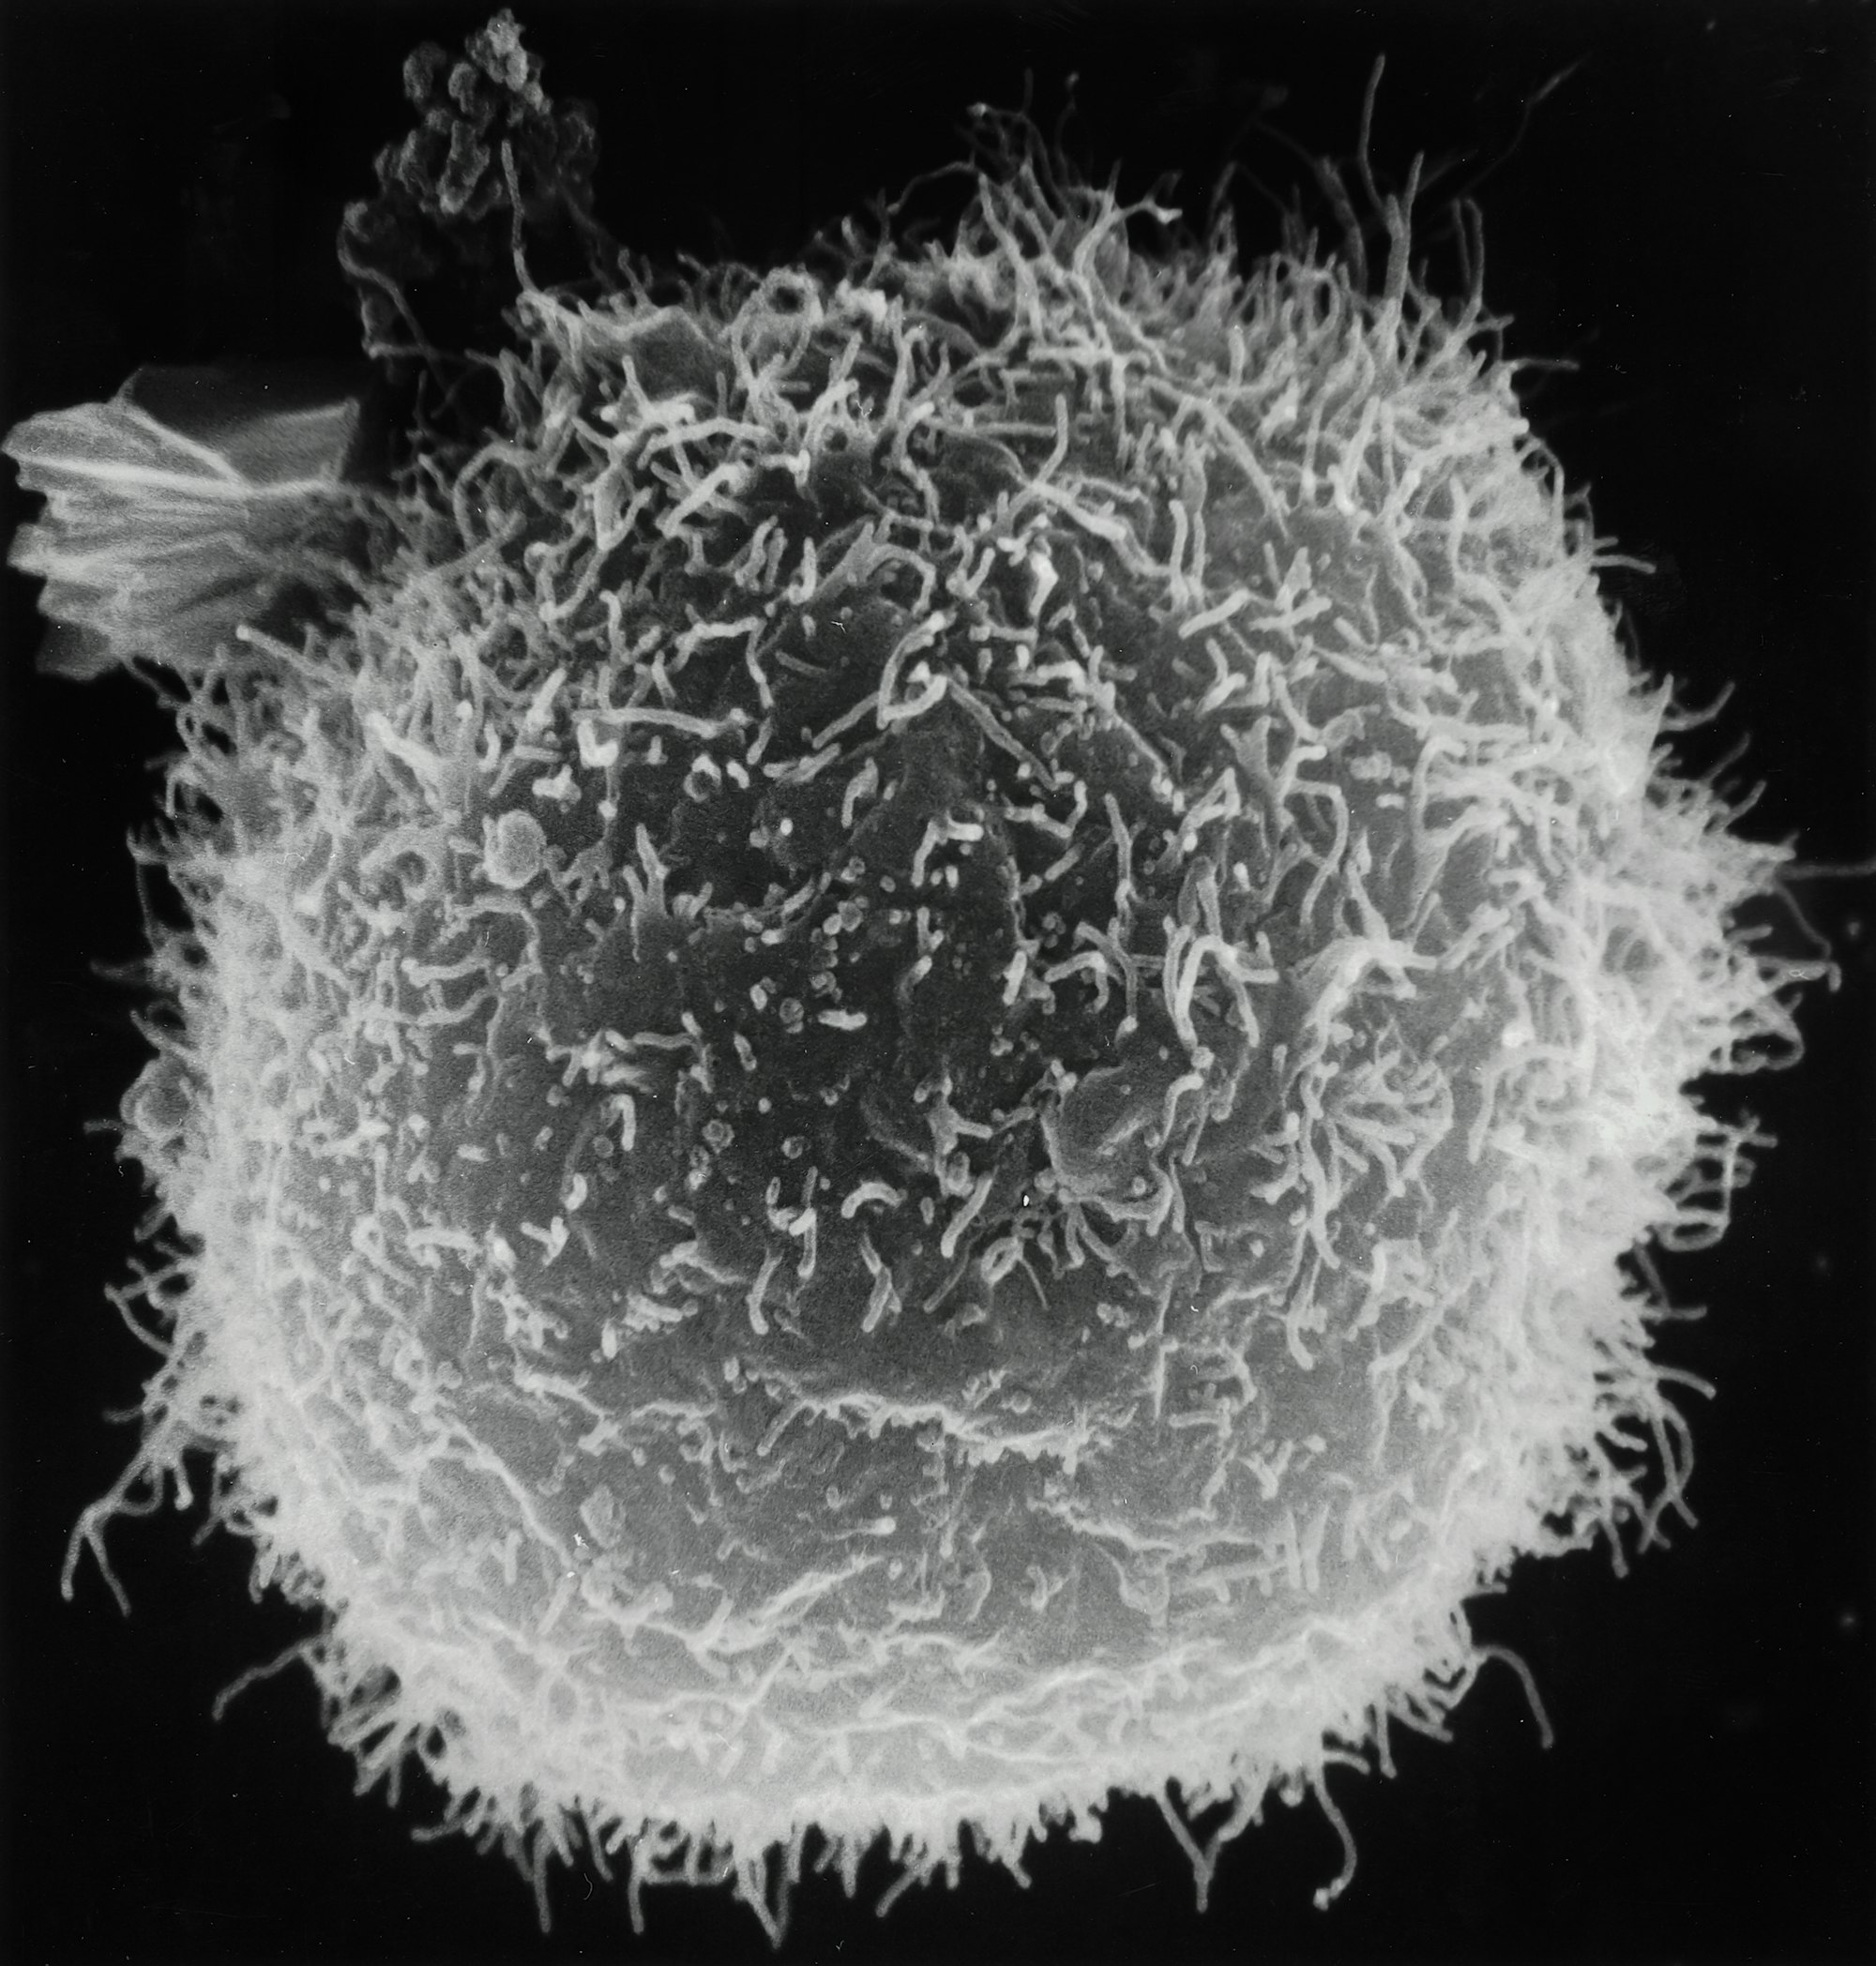 Scanning electron micrograph of macrophages with projectile-looking surfaces that are interacting with lymphocytes which are rounded.